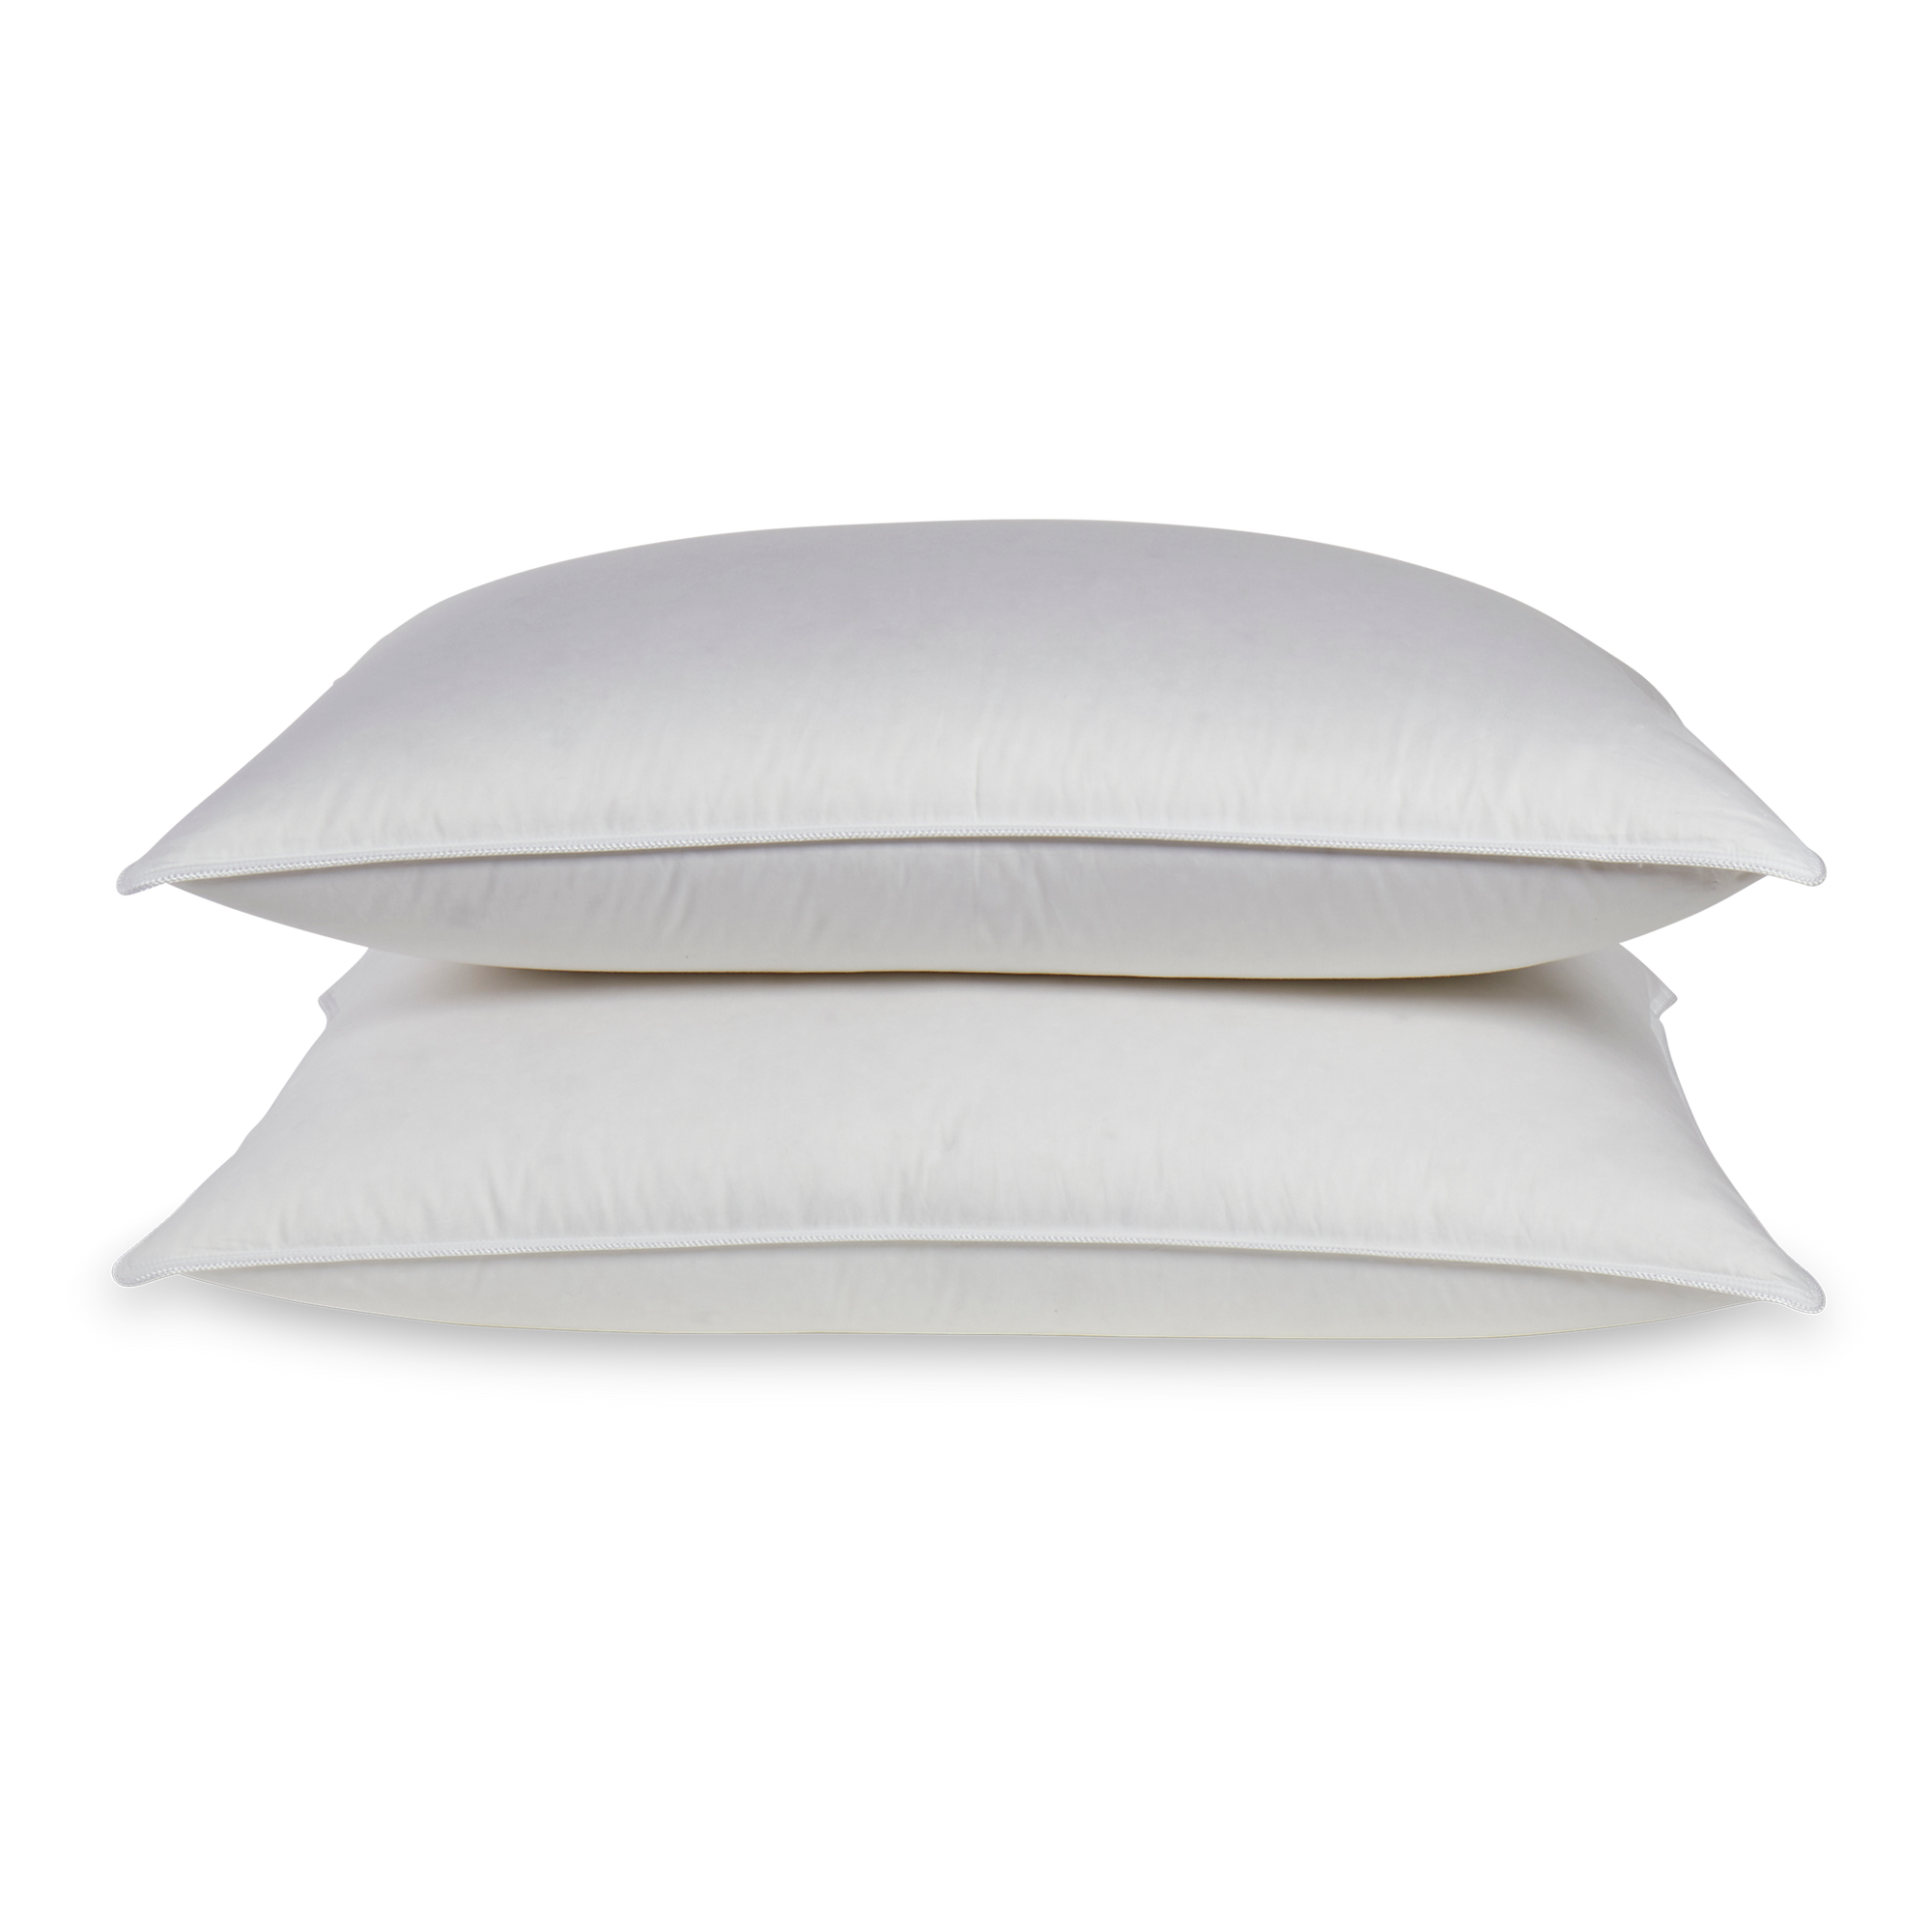 This pillow is made with white goose down from Poland that is highly regarded for its exceptional quality and features the comfort of 600 Fill Power.